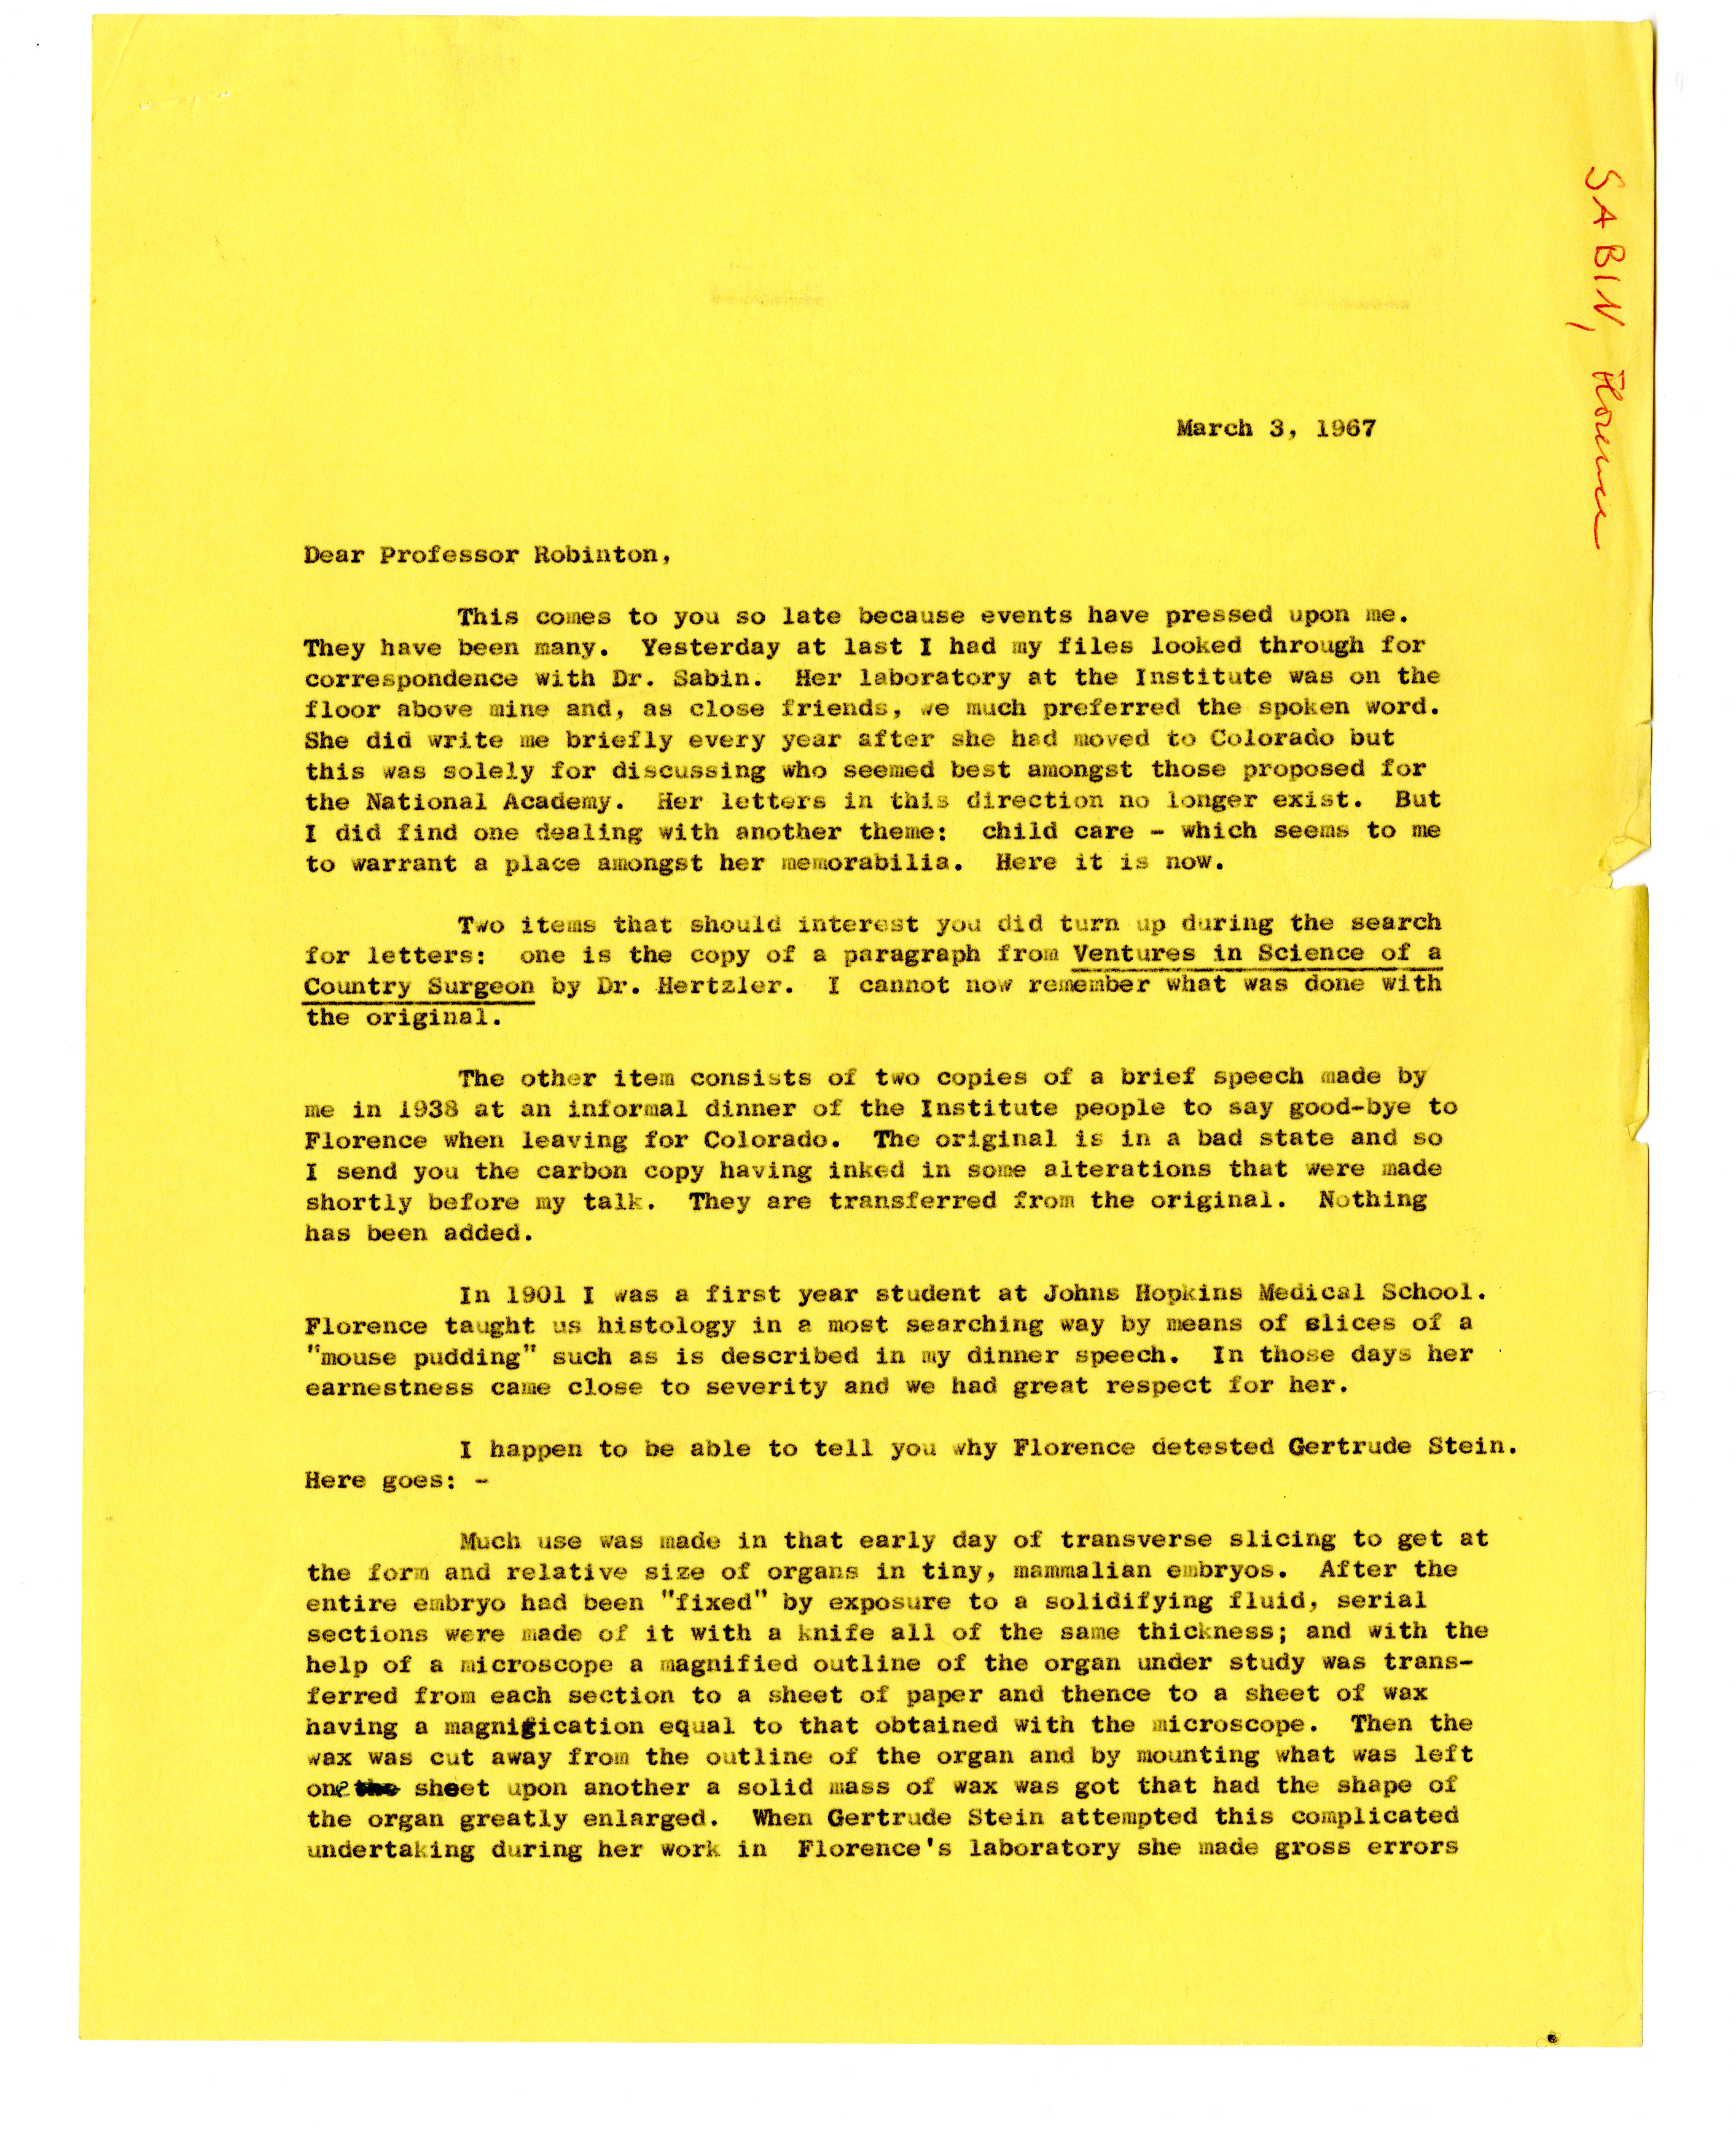 scan of typed letter